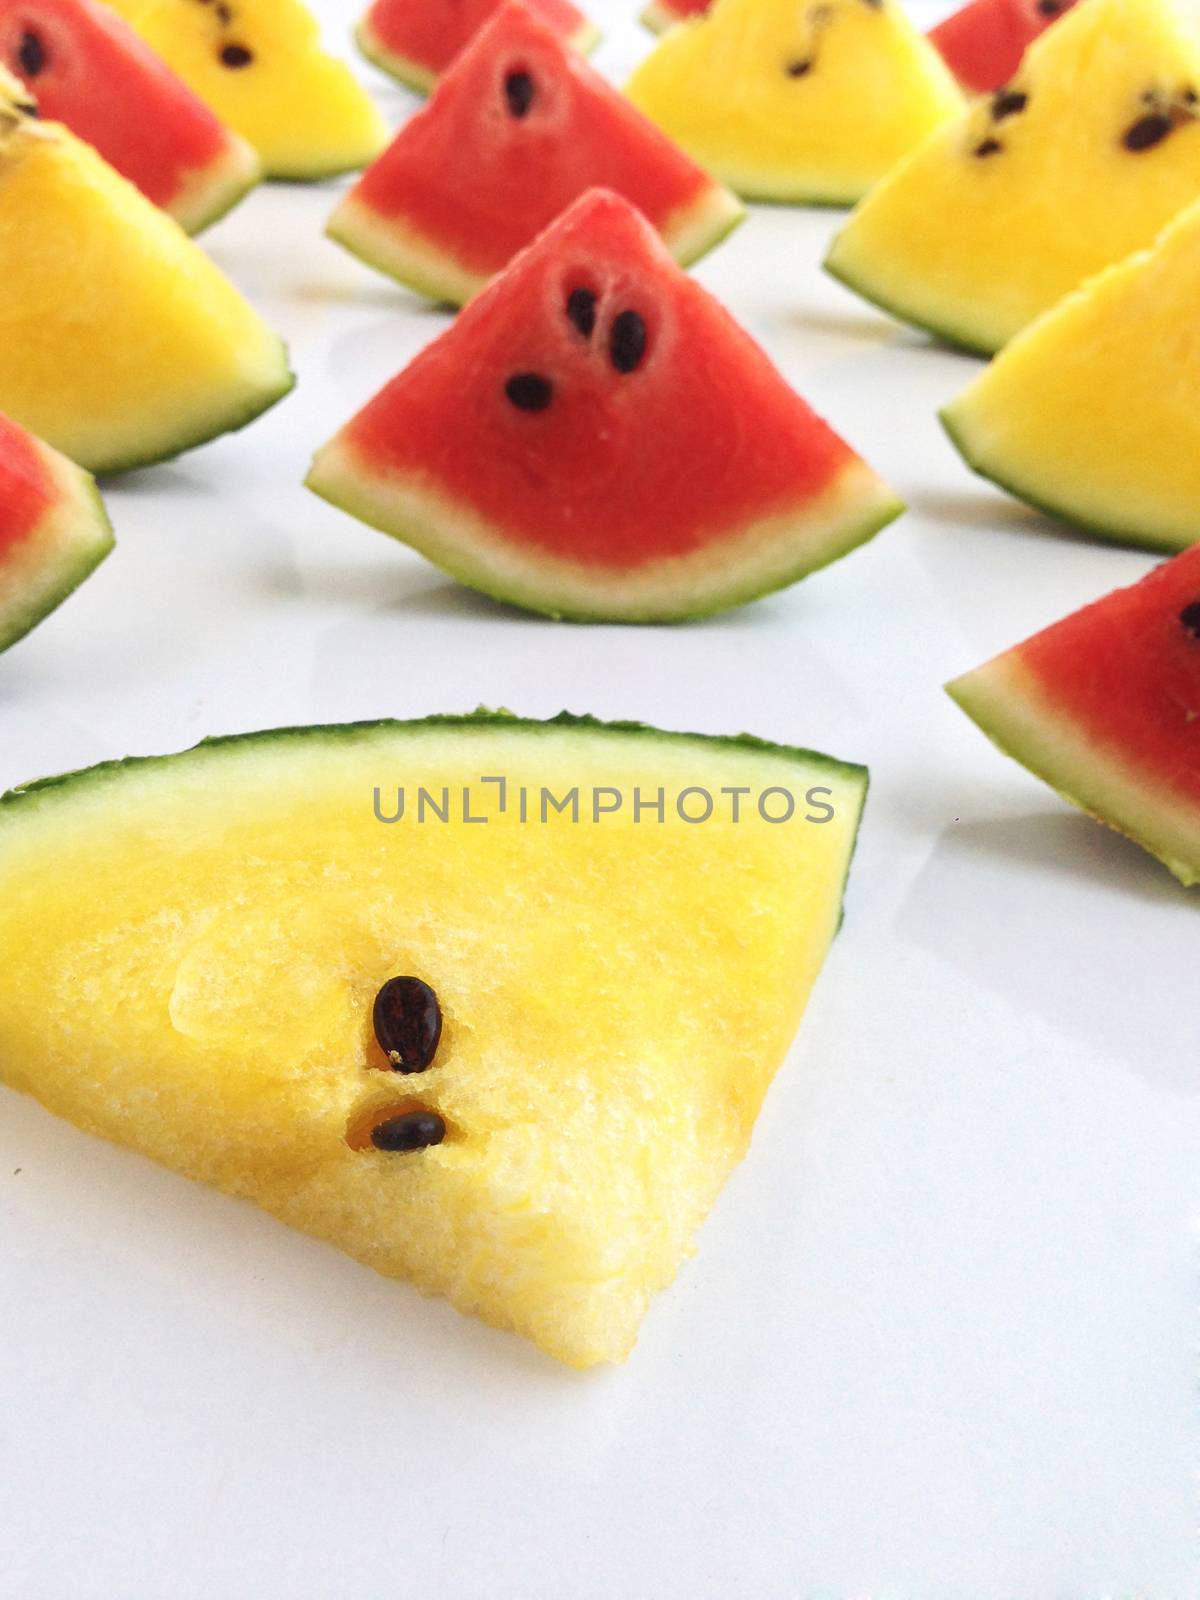 slices of red and yellow watermelon on white background